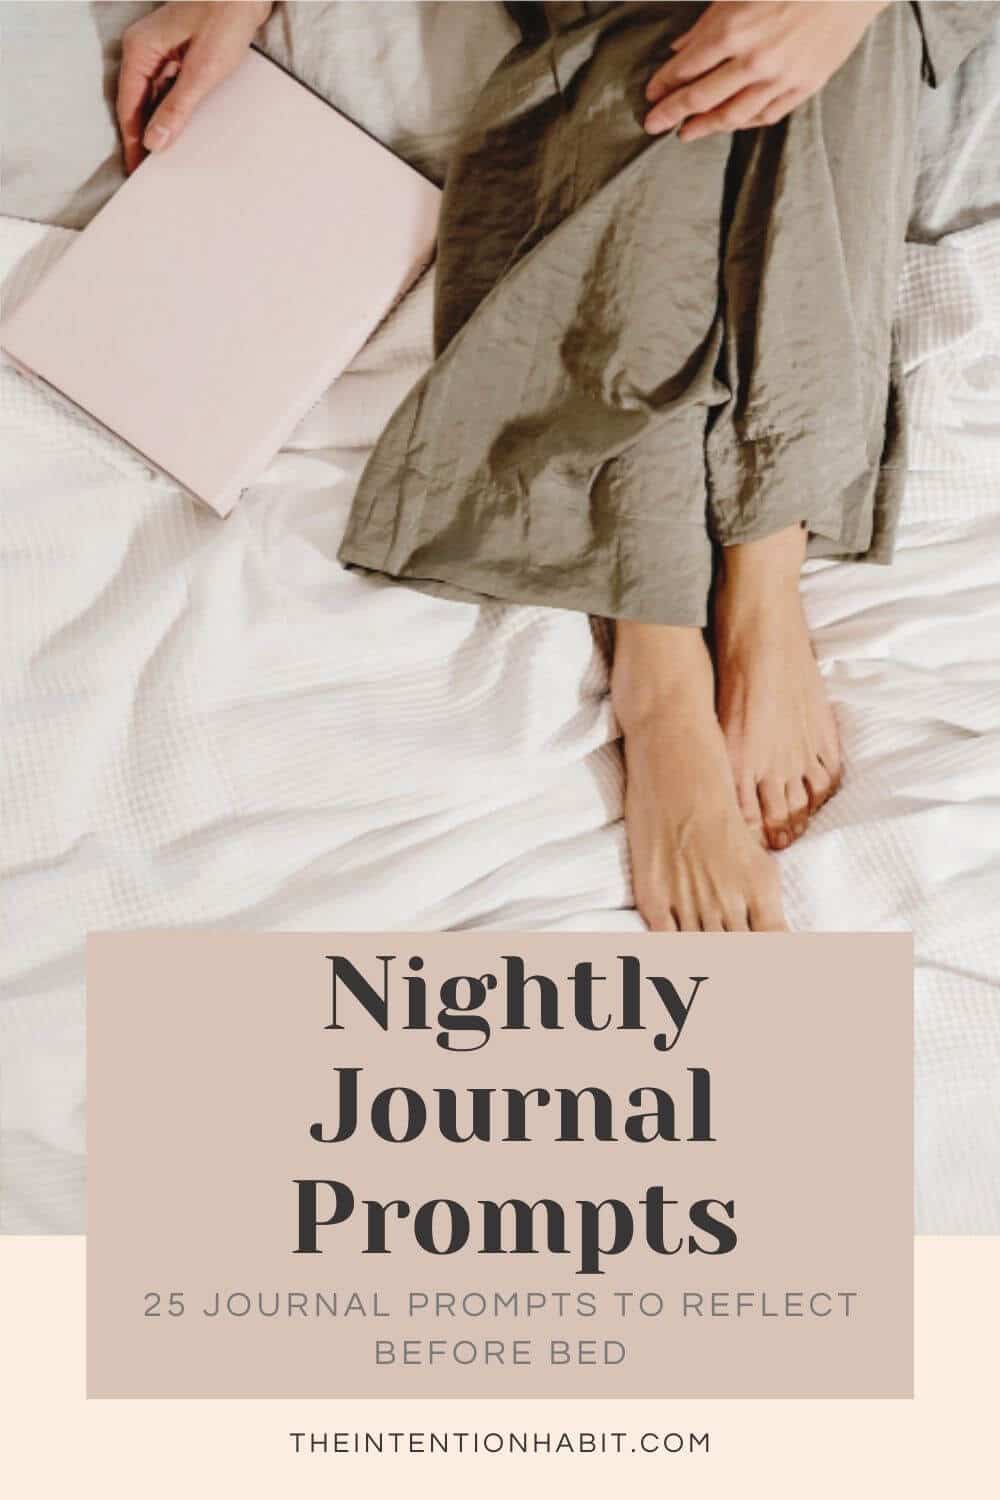 nightly journal prompts 25 journal prompts to reflect before bed.